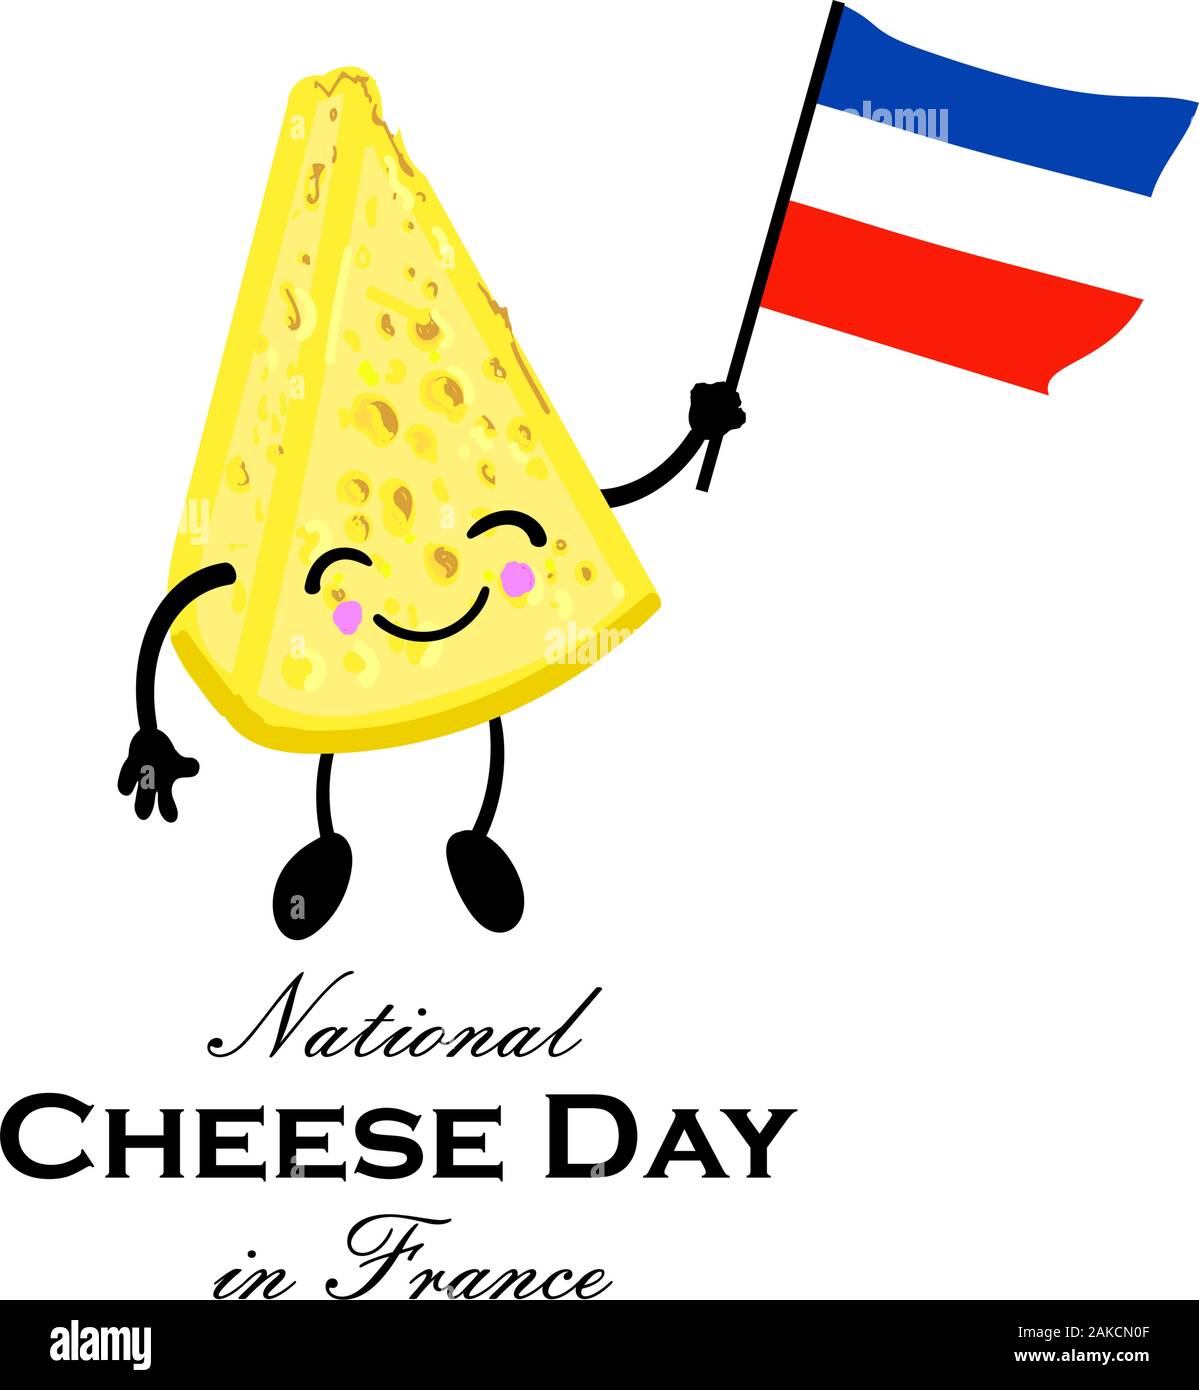 Cheese Day in France. National holiday of cheese. Cute character with arms and legs. French flag. Greeting card or poster.. Stock Vector